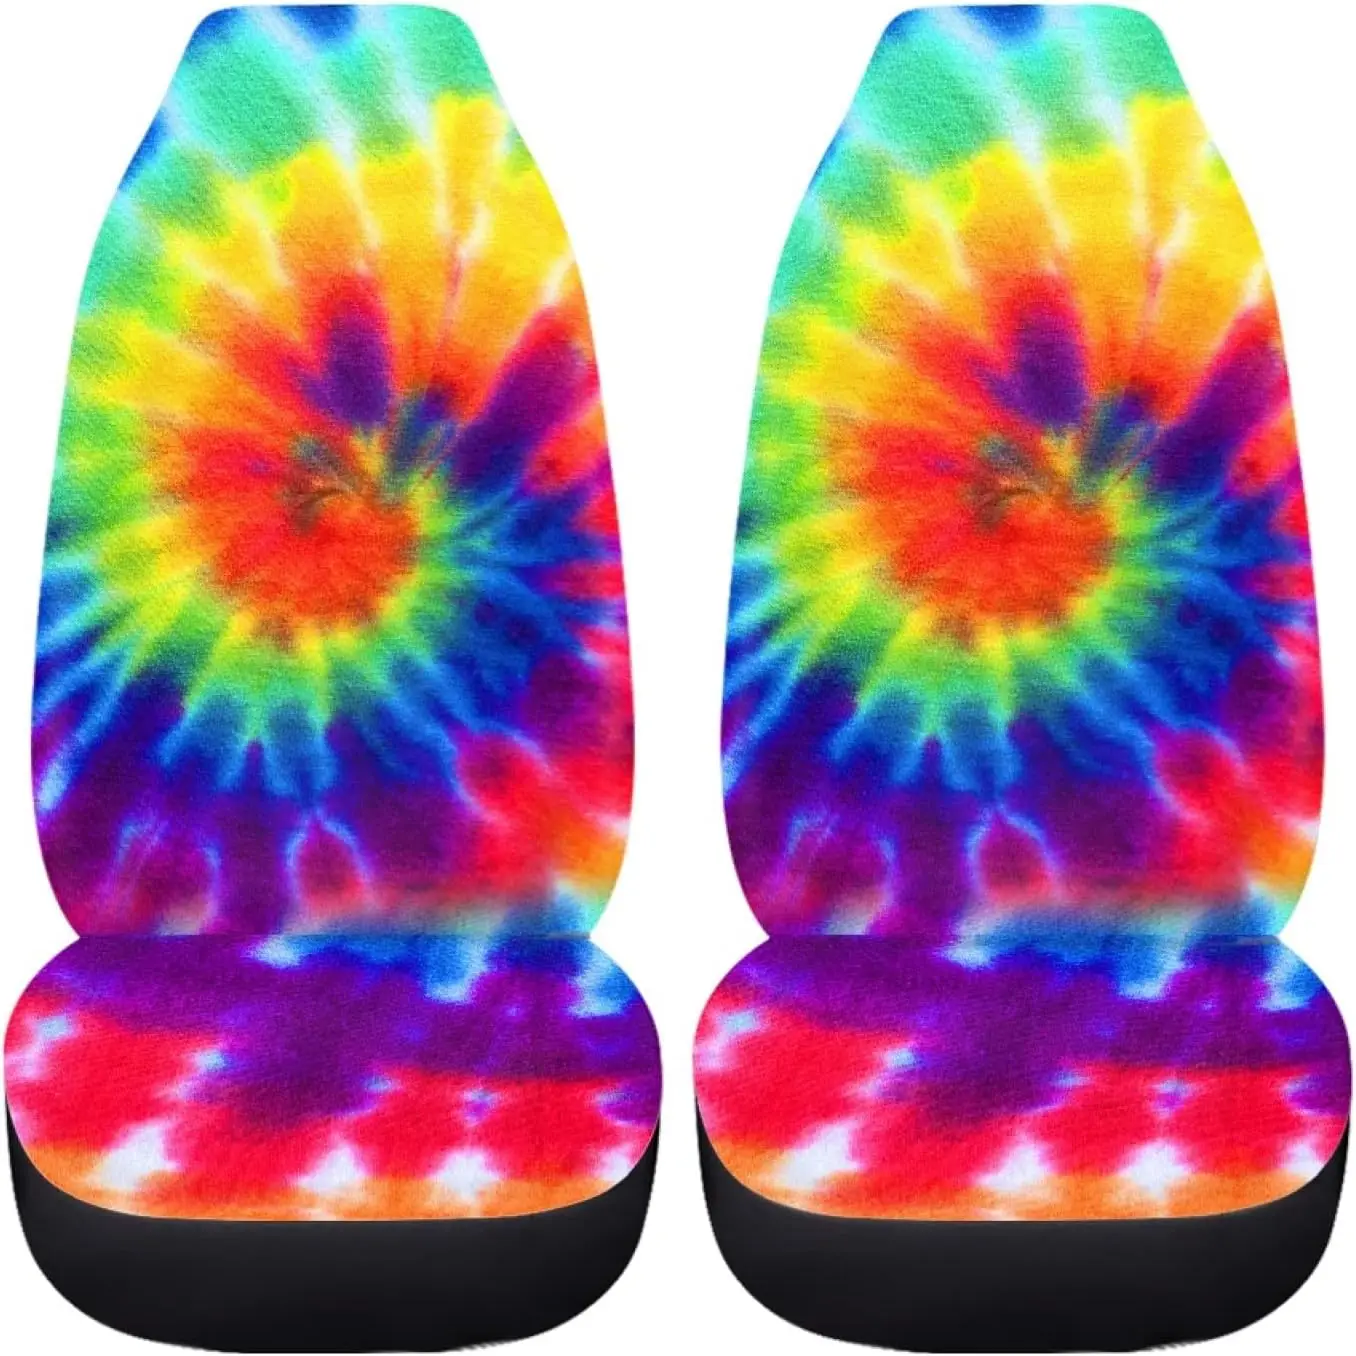 

Tribal Tie Dye Rainbow Design Universal Car Seat Covers 2 Piece Abstract Geometric Elastic Auto Front Bucket Seats Protector